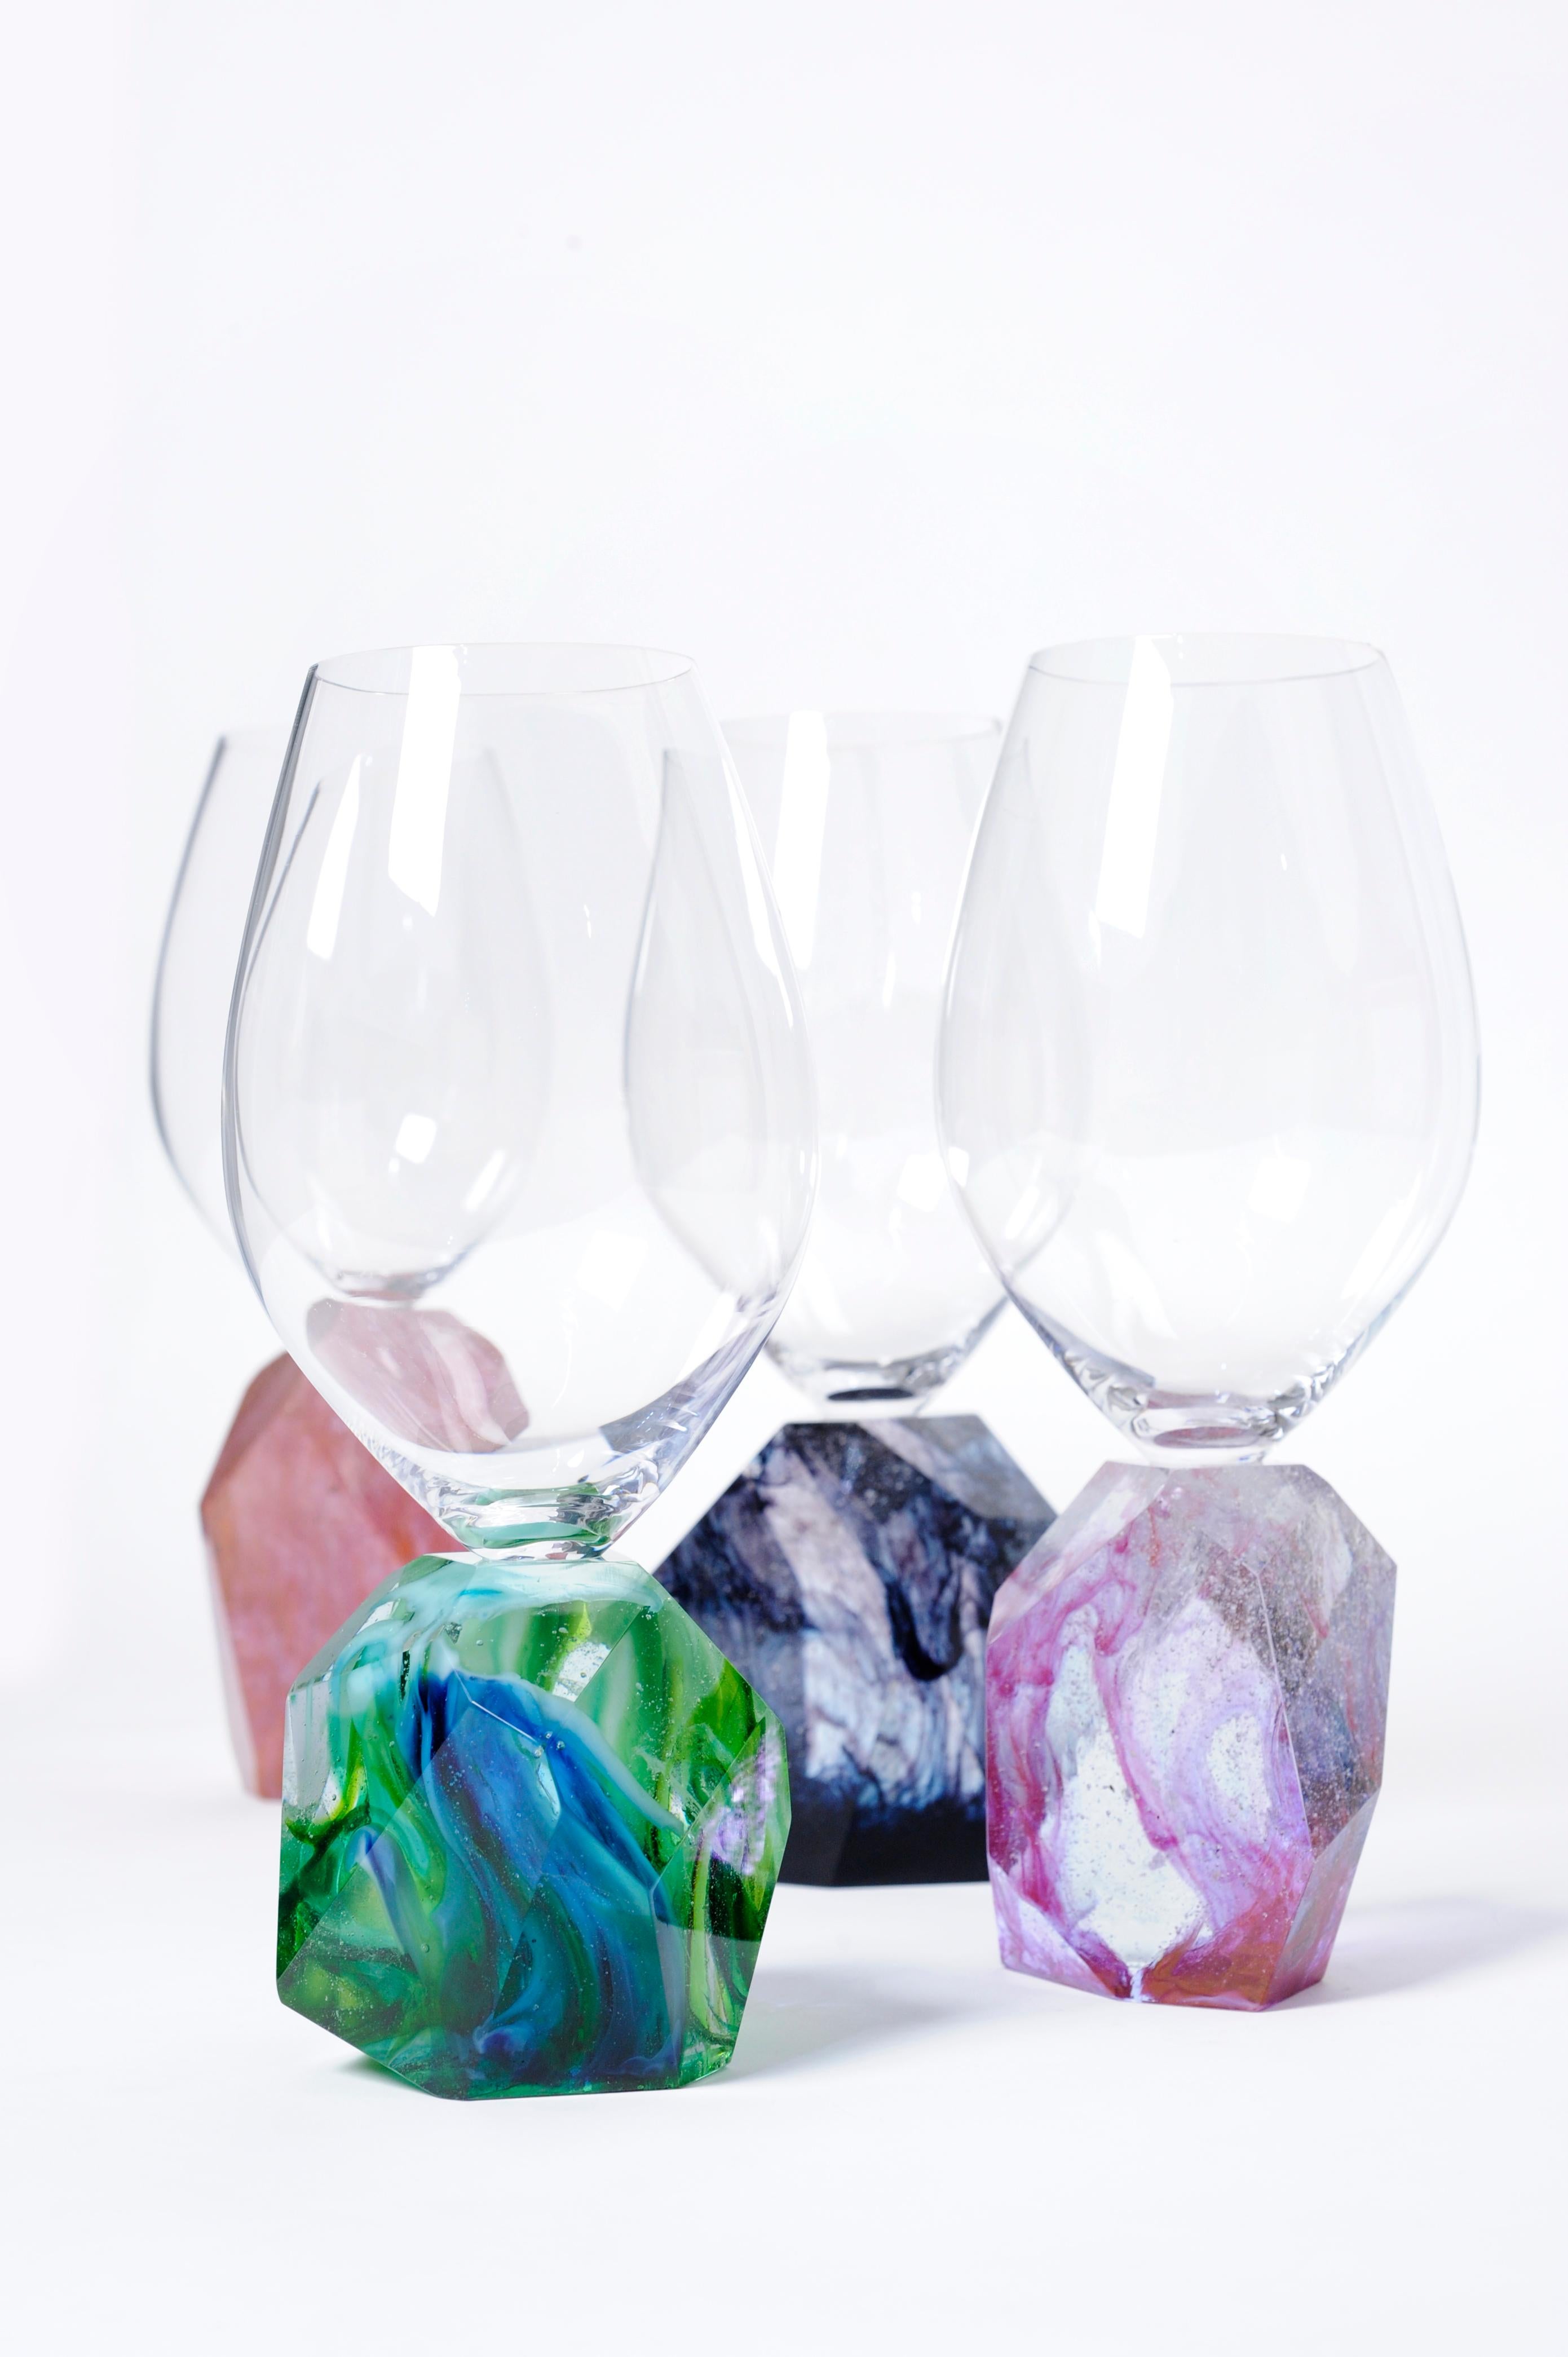 The new design of Orfeo Quagliata, a set of four wine glasses made by hand with the highest quality crystal.
Each facet of the handle is made one by one to later be polished in our workshop.
Touches of color that remain suspended in time with the